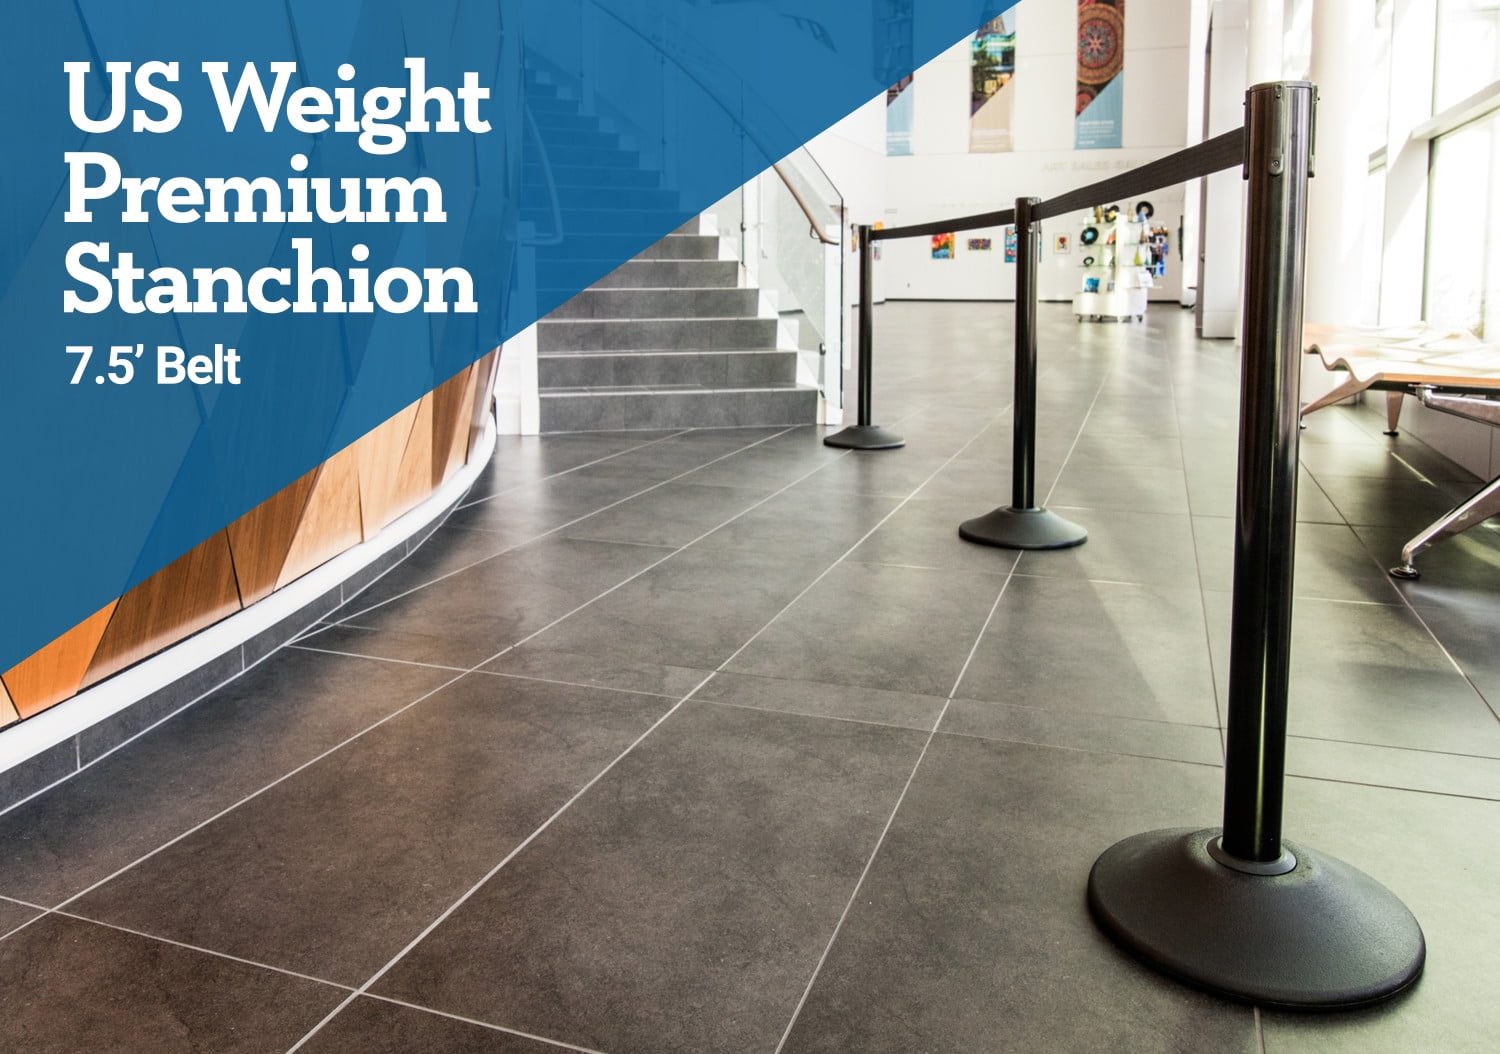 US Weight Premium Stanchion with 7.5-Feet Retractable Belt Yellow Silver Powder Coated 2.5-Inch Diameter Steel Post 